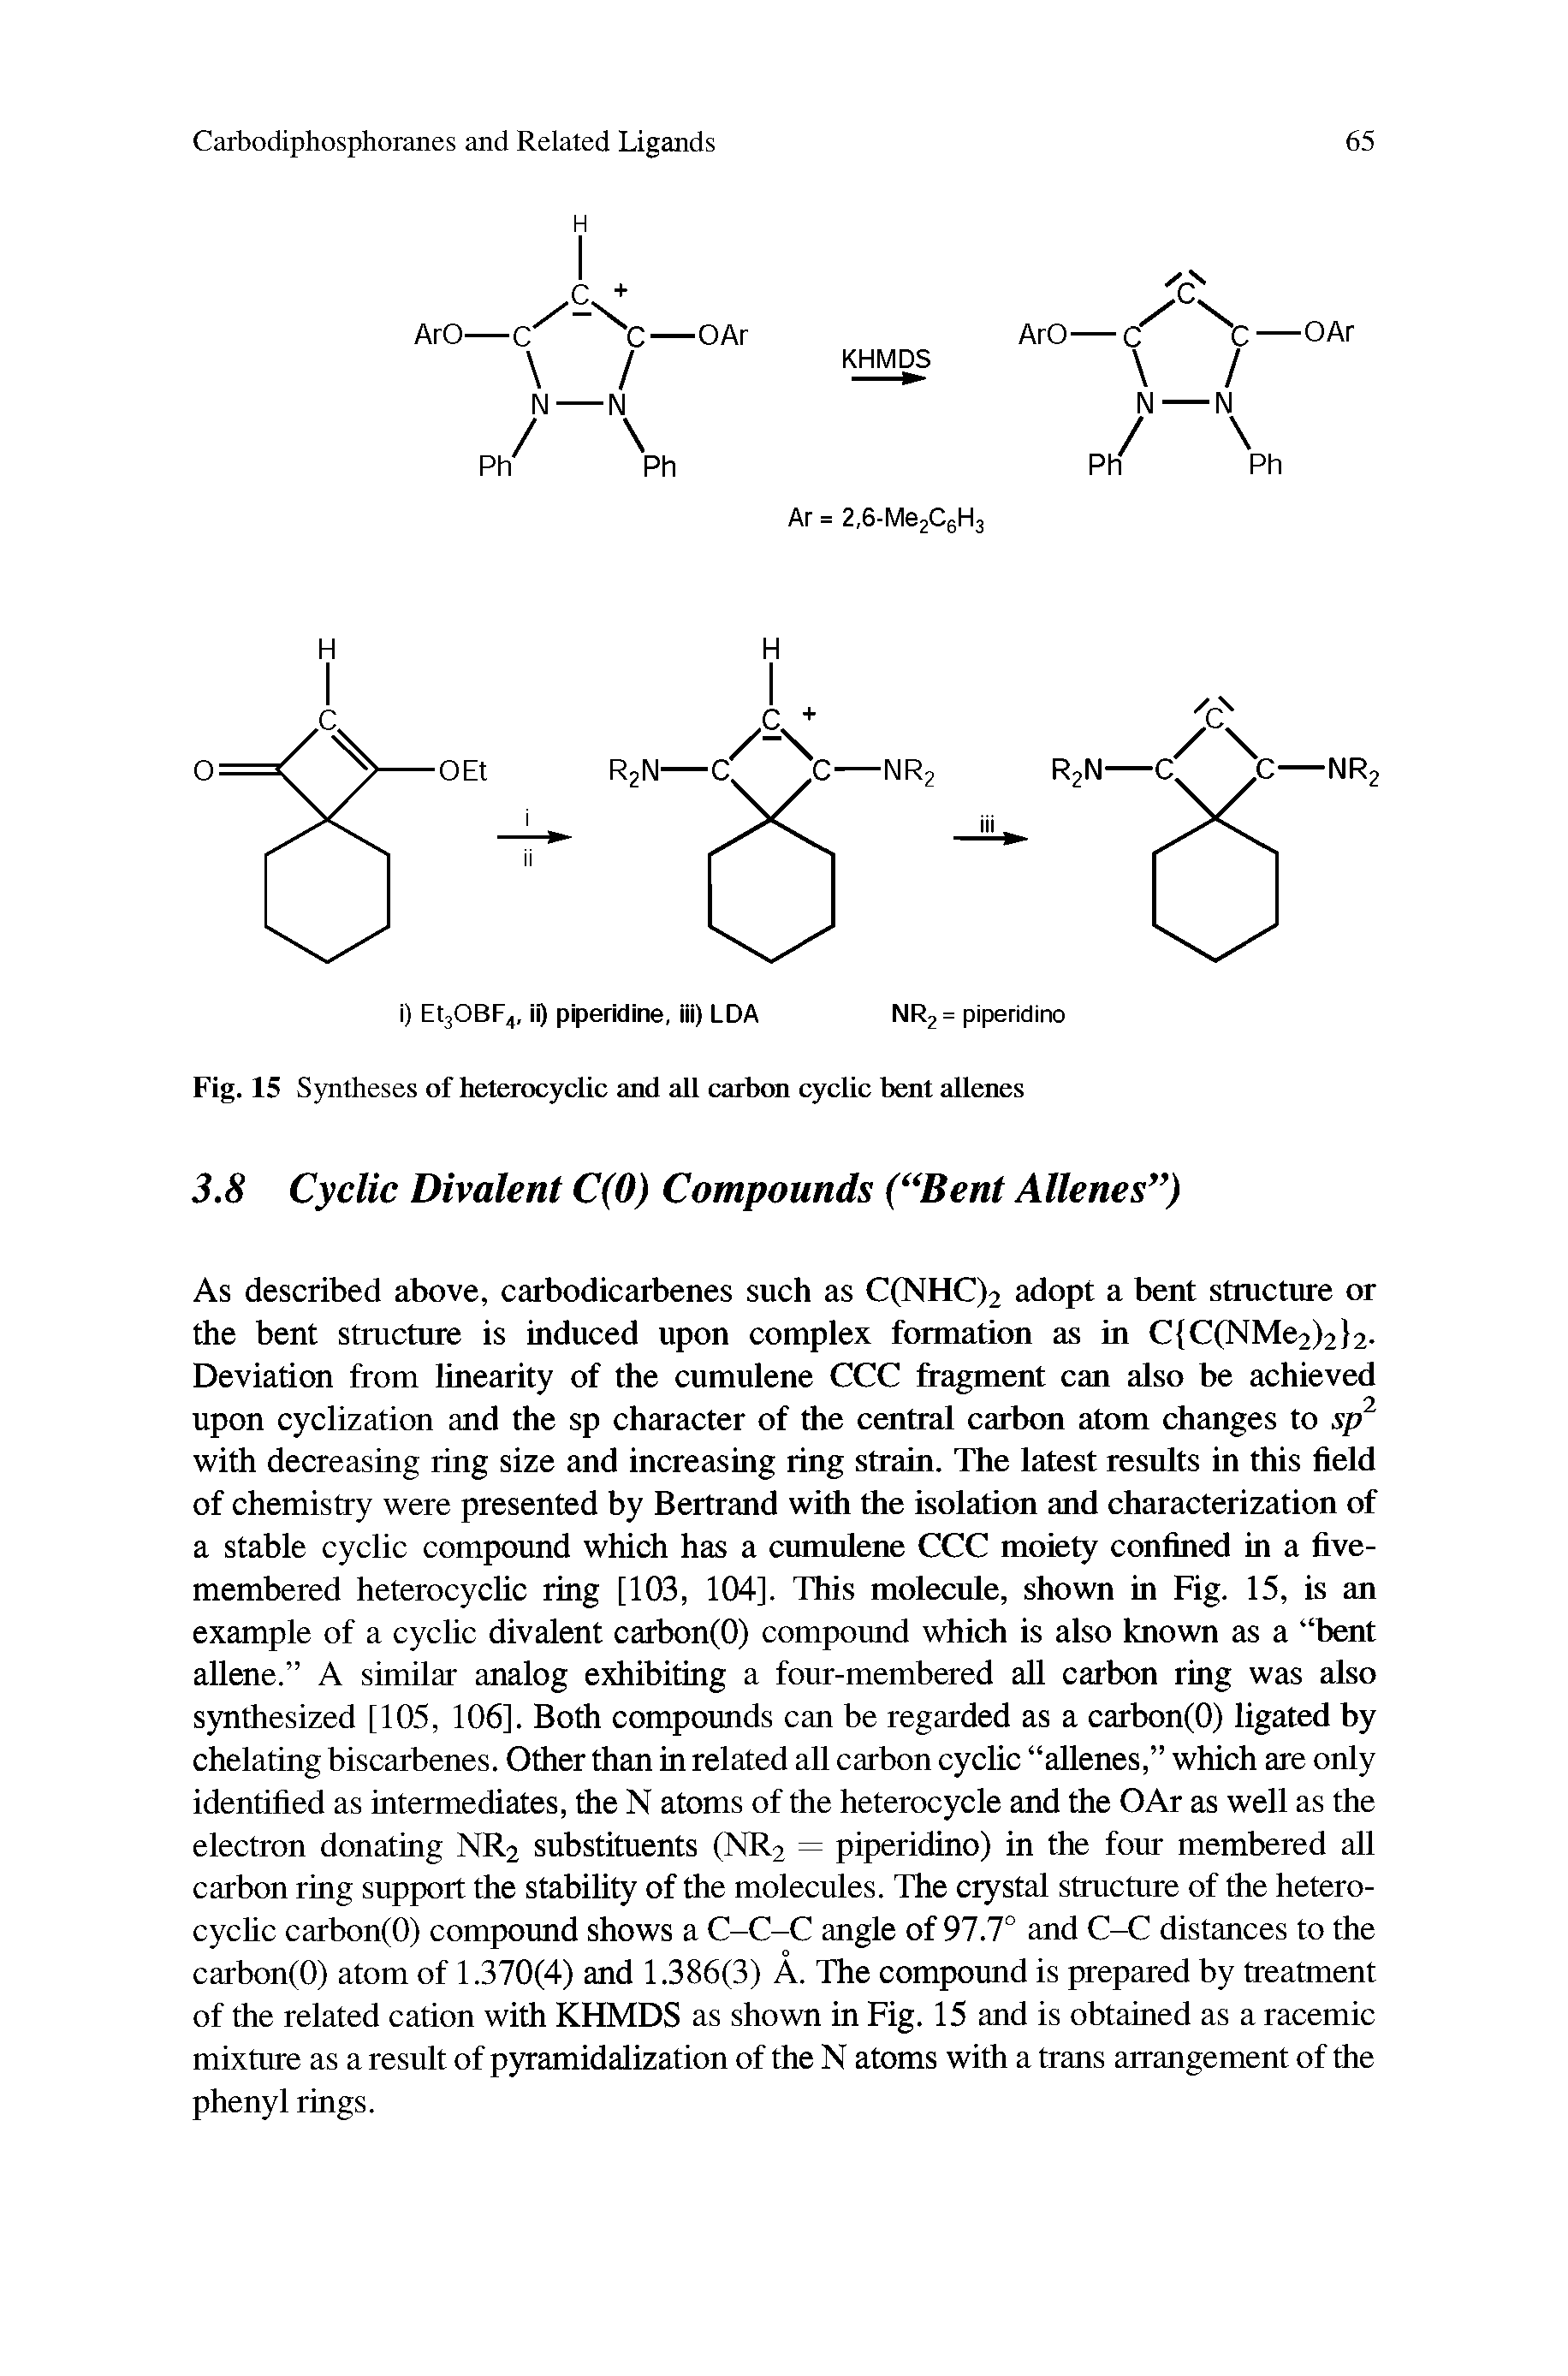 Fig. 15 Syntheses of heterocyclic and all carbon cyclic bent allenes...